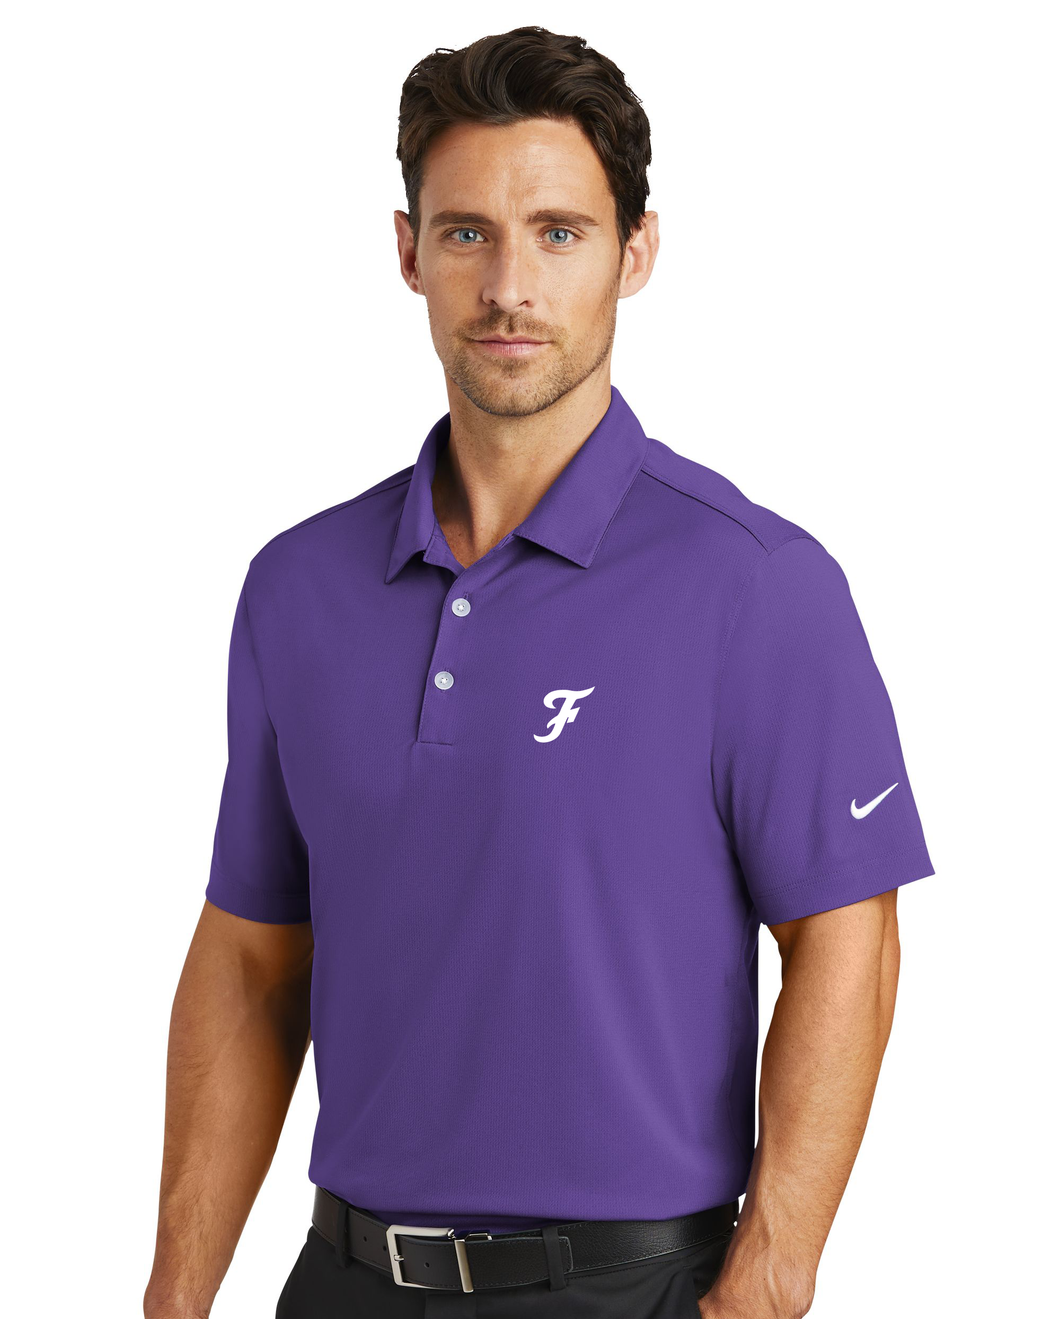 FHS F - Left Chest Embroidery Nike Dri-FIT Vertical Mesh Polo